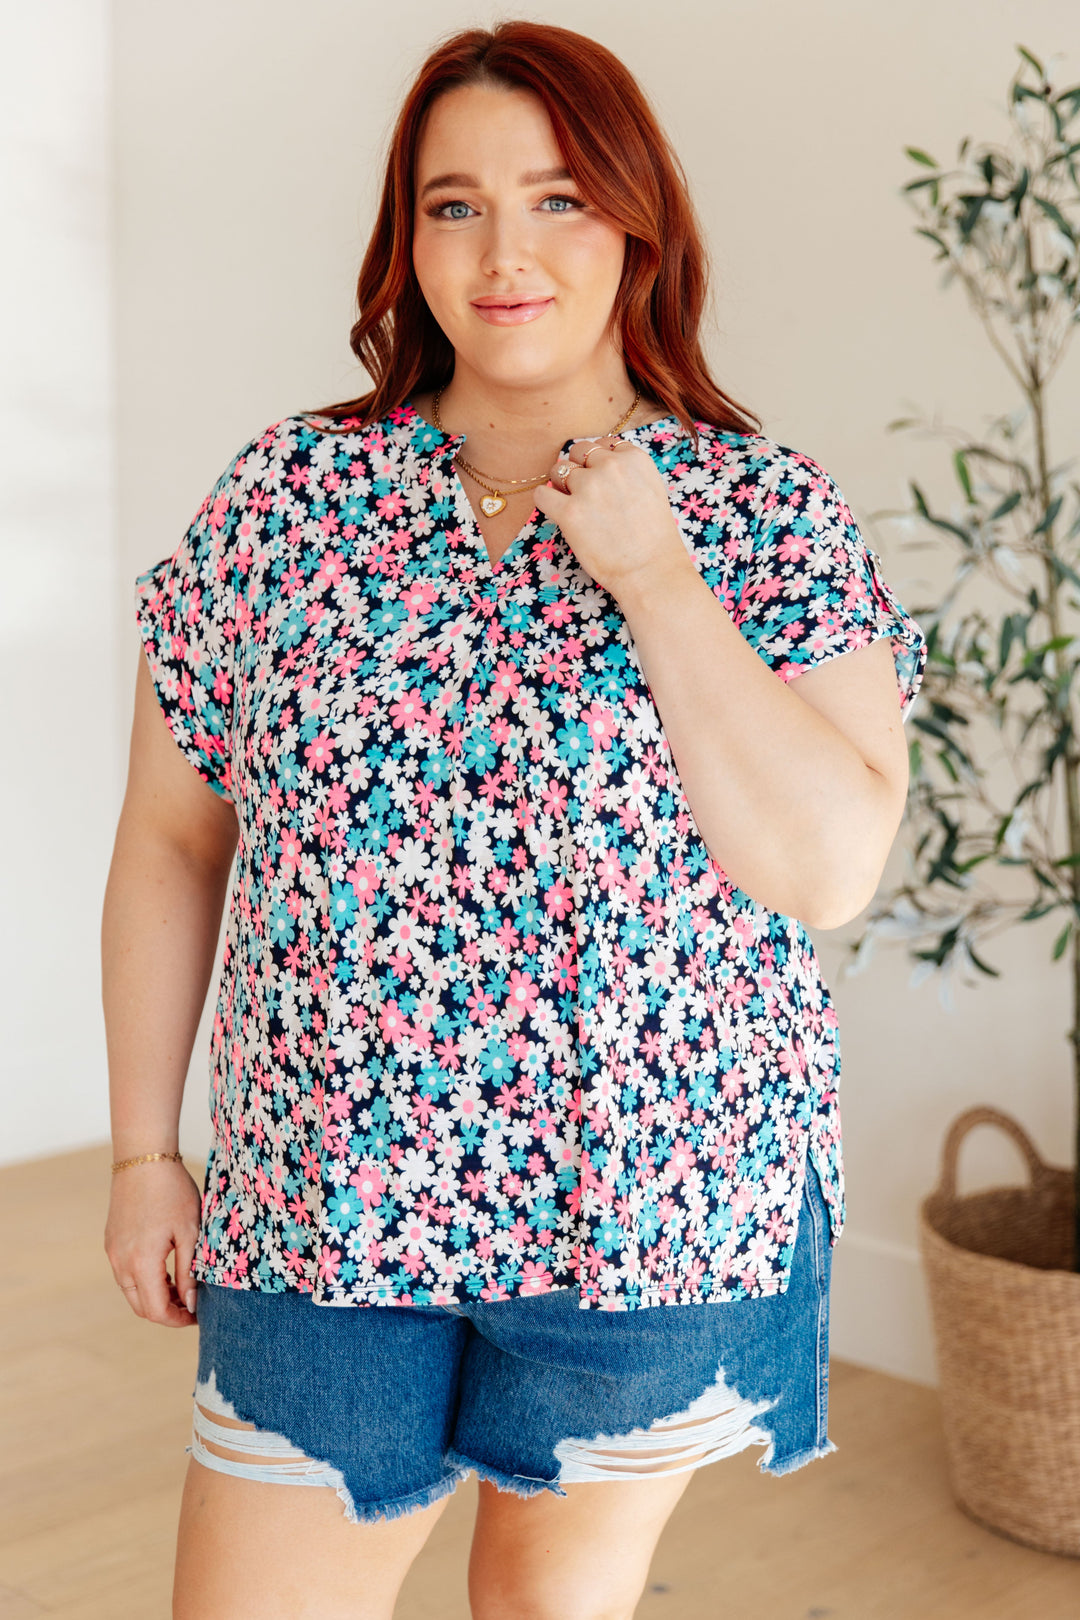 Lizzy Cap Sleeve Top in Navy and Hot Pink Floral-Short Sleeve Tops-Inspired by Justeen-Women's Clothing Boutique in Chicago, Illinois